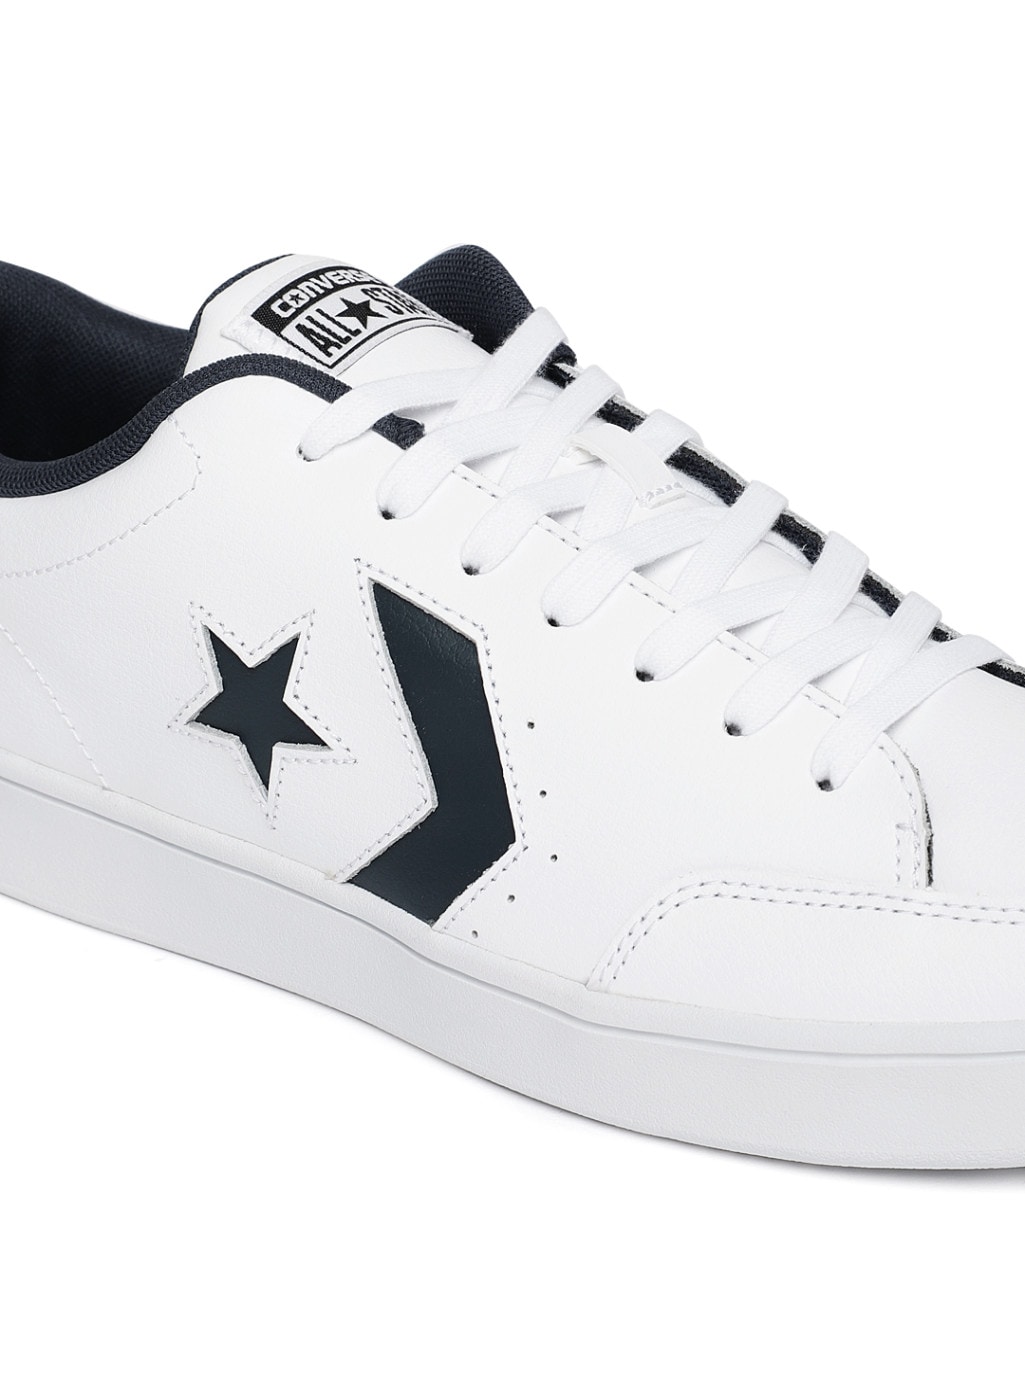 converse white leather sneakers